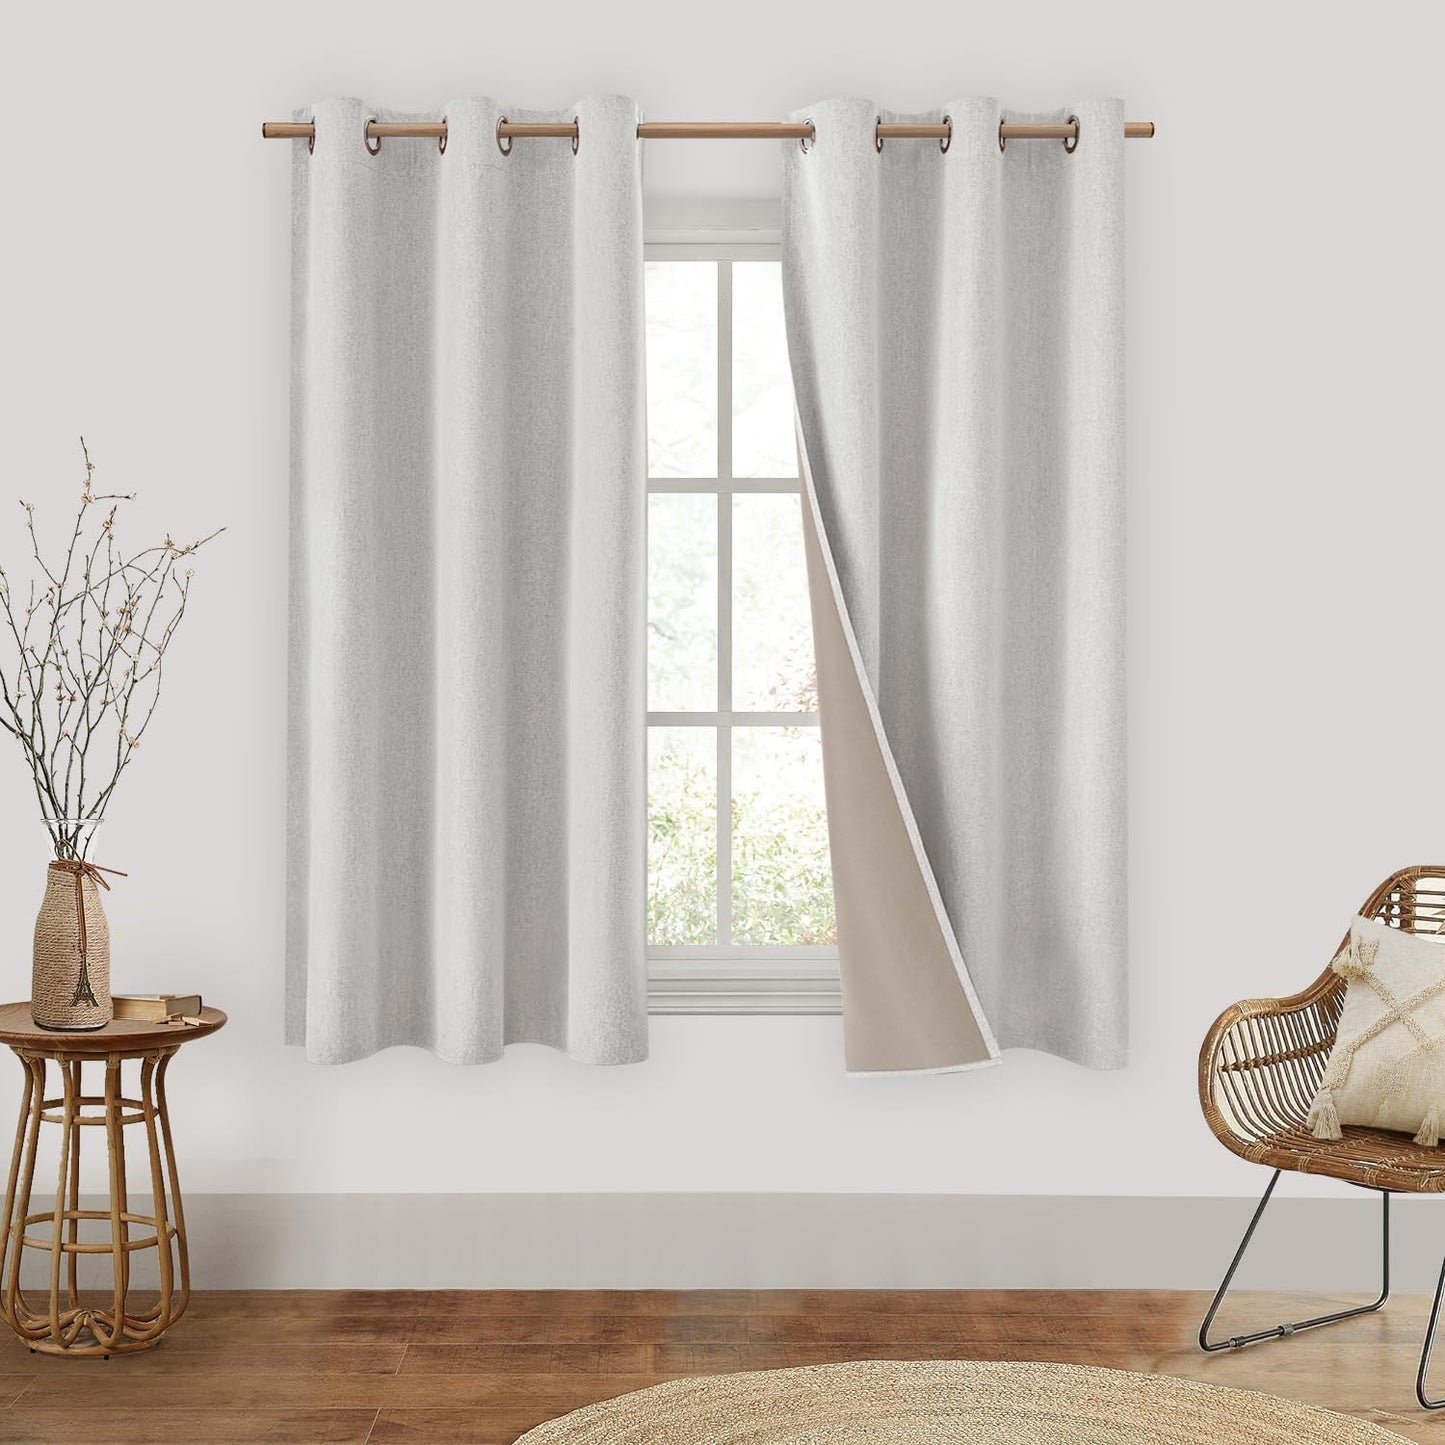 HOMEIDEAS 100% Blackout Linen Curtains for Bedroom 84 Inches Long 2 Panels Blush Pink Curtains Full Black Out Thermal Insulated Grommet Window Curtains/Drapes with Liner for Nursery  HOMEIDEAS Ivory/Cream 42"W X 63"L 